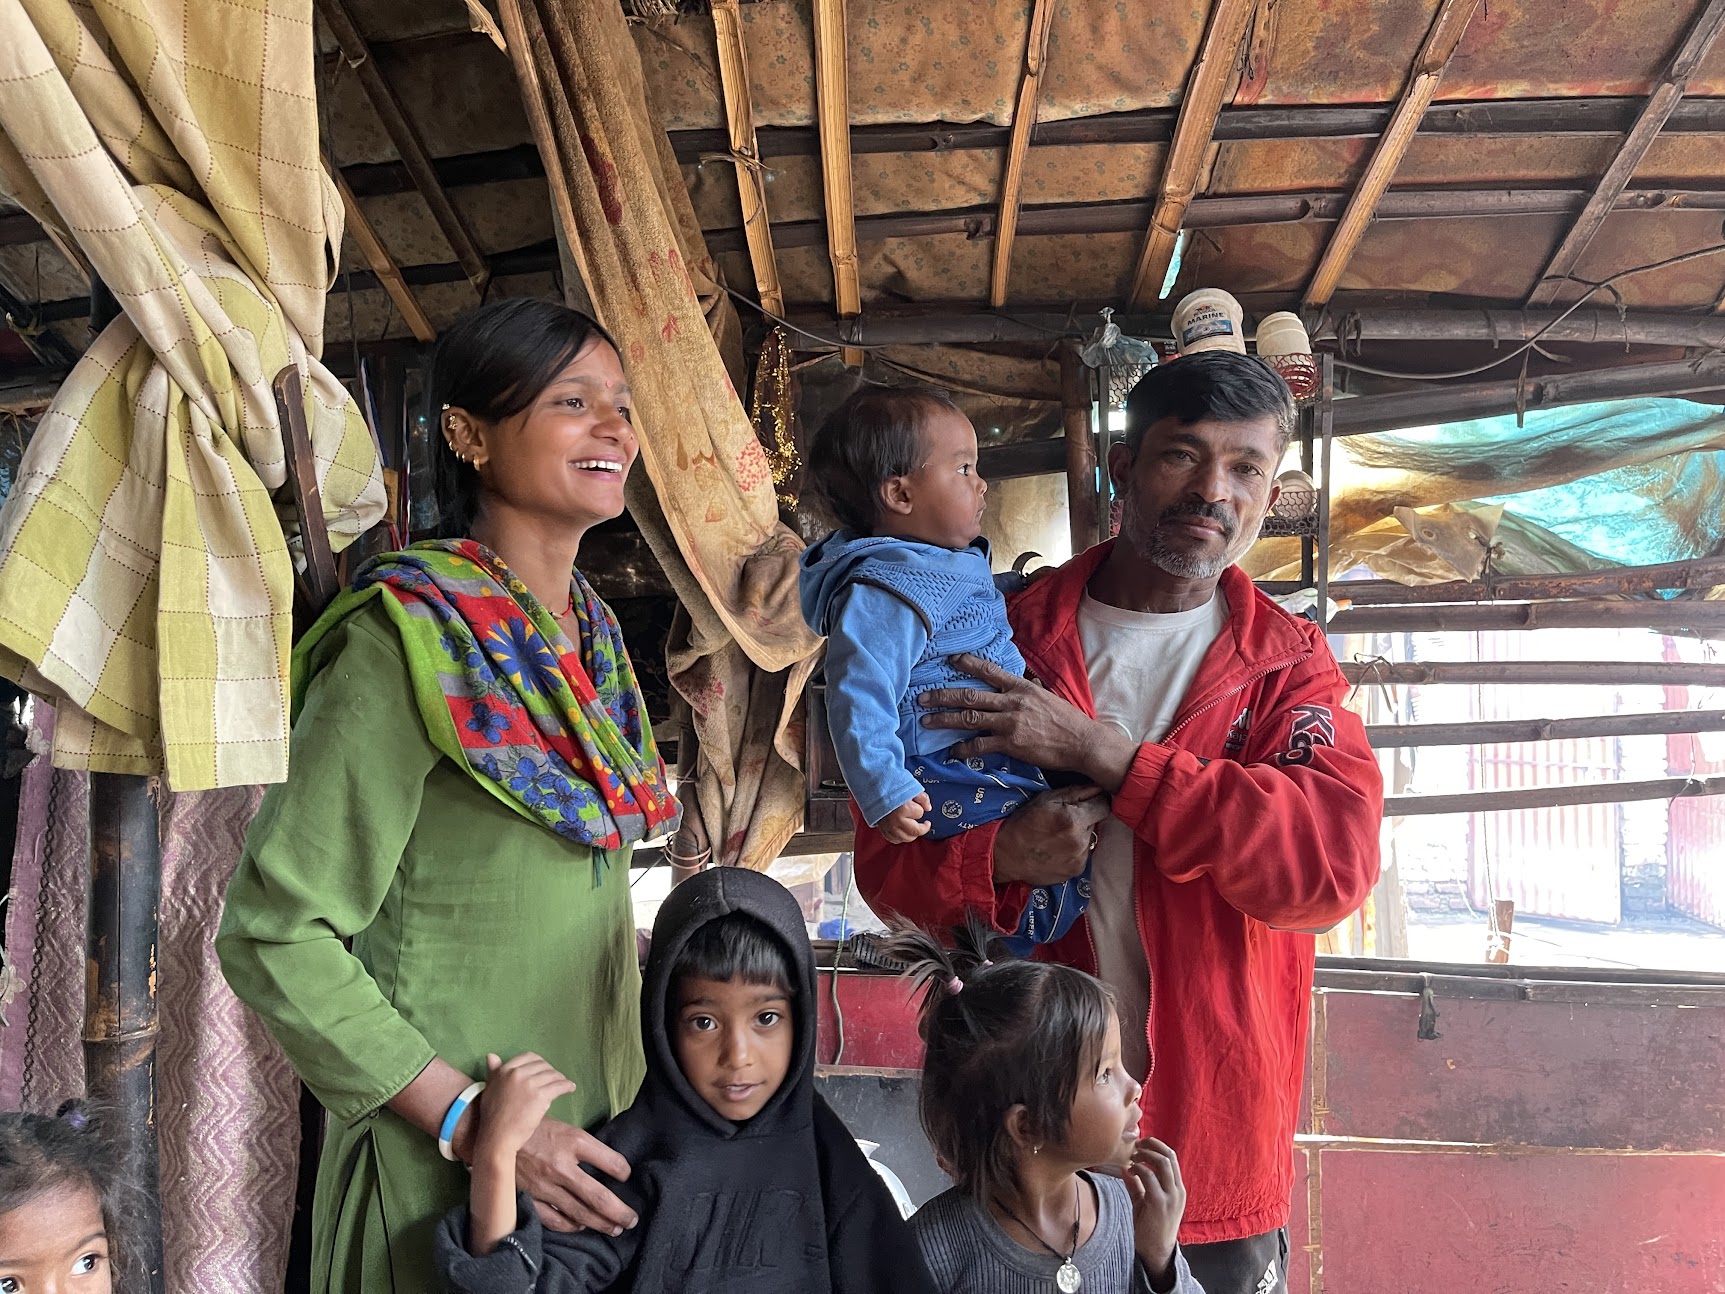 A family in Nepal with two adults and three children posing for a photo inside a room with a rustic interior.